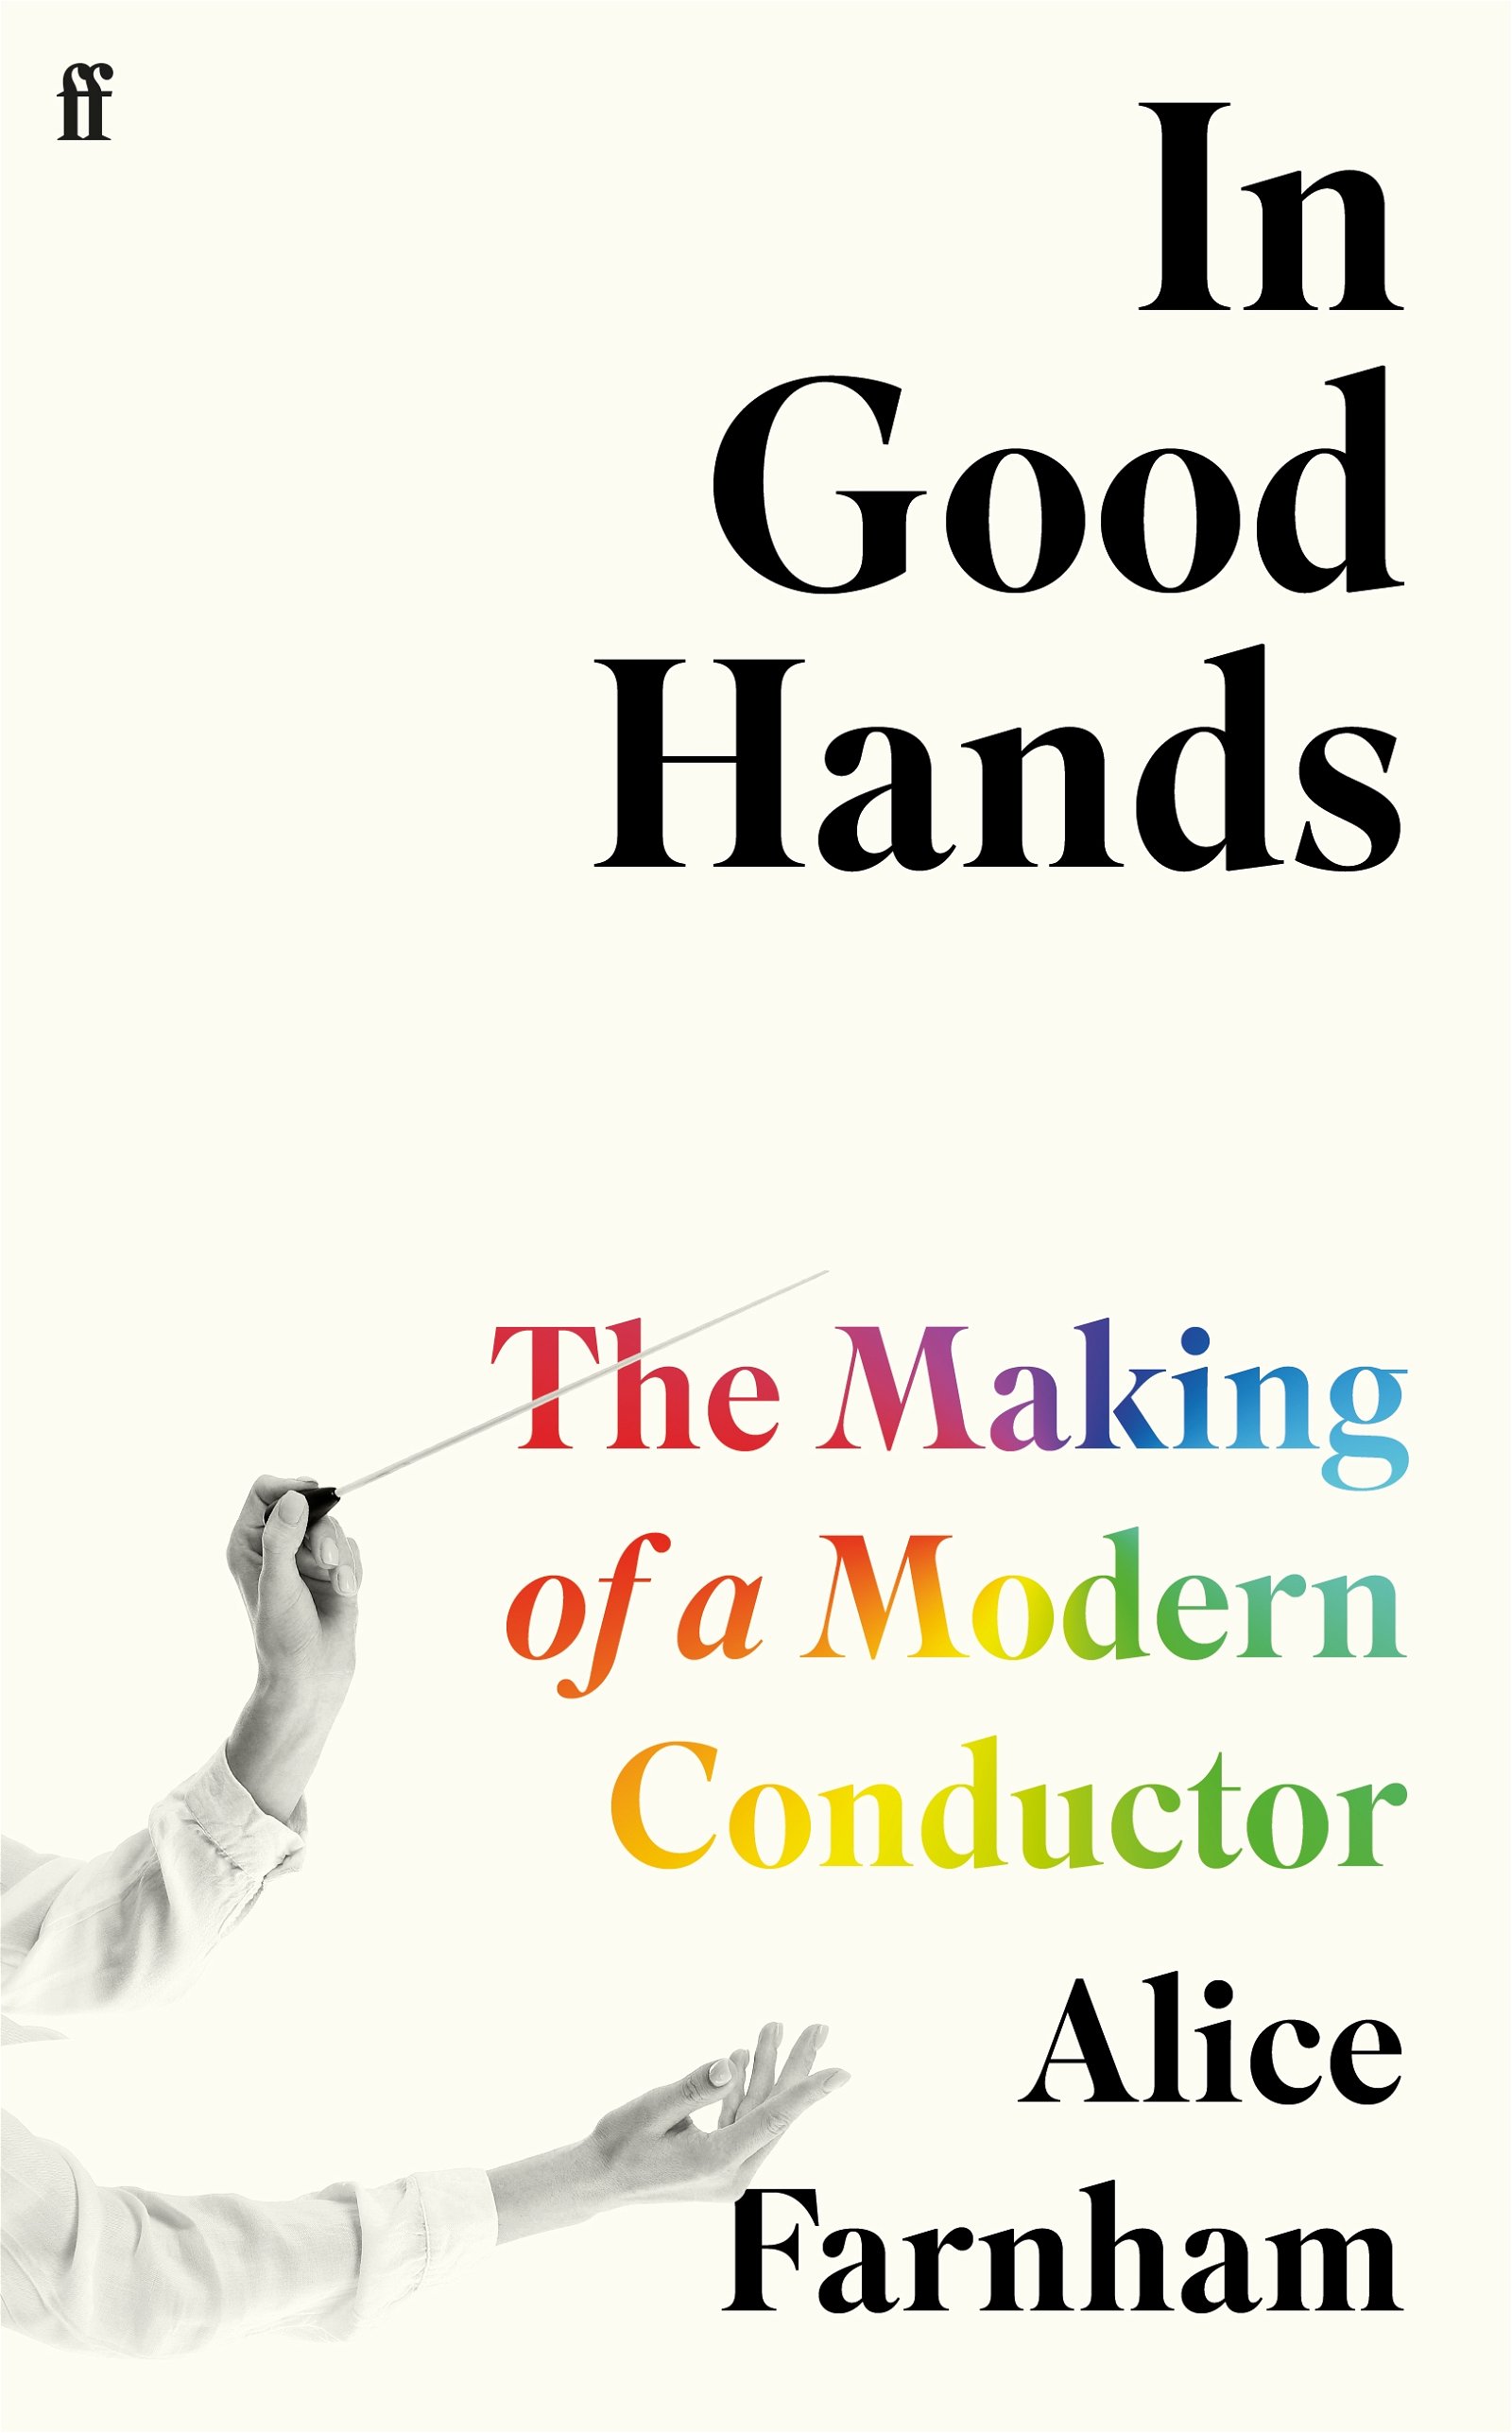 a　Hands:　Conductor　In　Making　The　Modern　Faber　Good　of